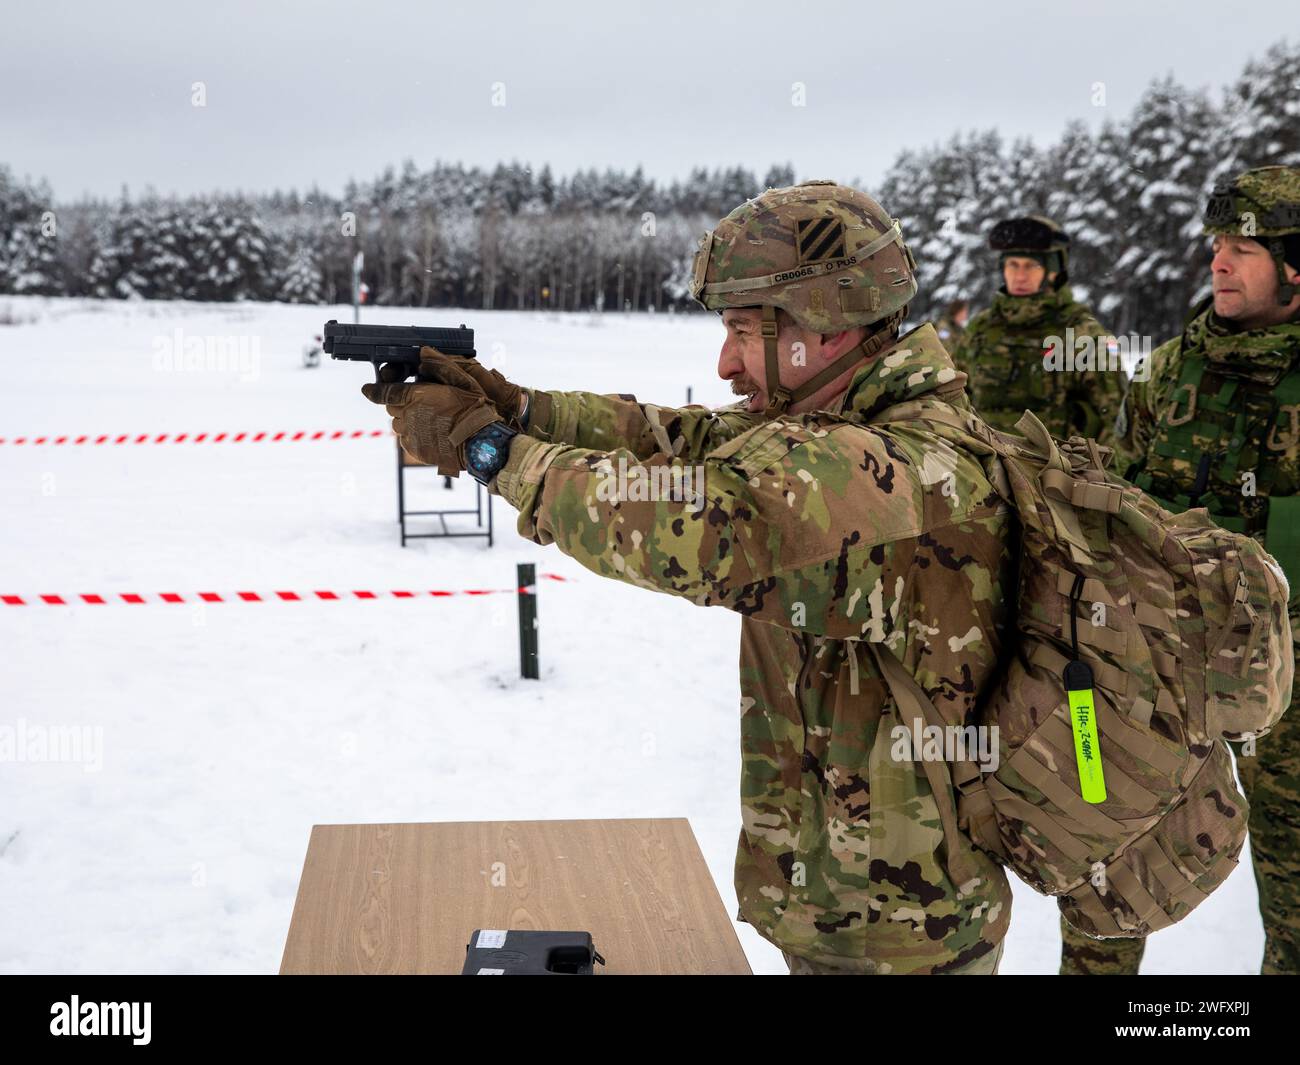 U.S. Army Sgt. Chris Bates, an intelligence analyst with Headquarters and Headquarters “Hazard” Company, 2nd Battalion, 69th Armored Regiment “Panther Battalion,” 2nd Armored Brigade Combat Team, 3rd Infantry Division, fires an HS-9 pistol during the Croatian “Winter Challenge” at Bemowo Piskie Training Area, Poland, Jan. 5, 2024. The Croatian “Winter Challenge” is a 15-kilometer competition consisting of seven events: land navigation, small arms firing, wall climbing, obstacle course while wearing a gas mask, rope crossing, low-crawl and obstacle climbing, and a hand grenade toss. U.S., Polis Stock Photo